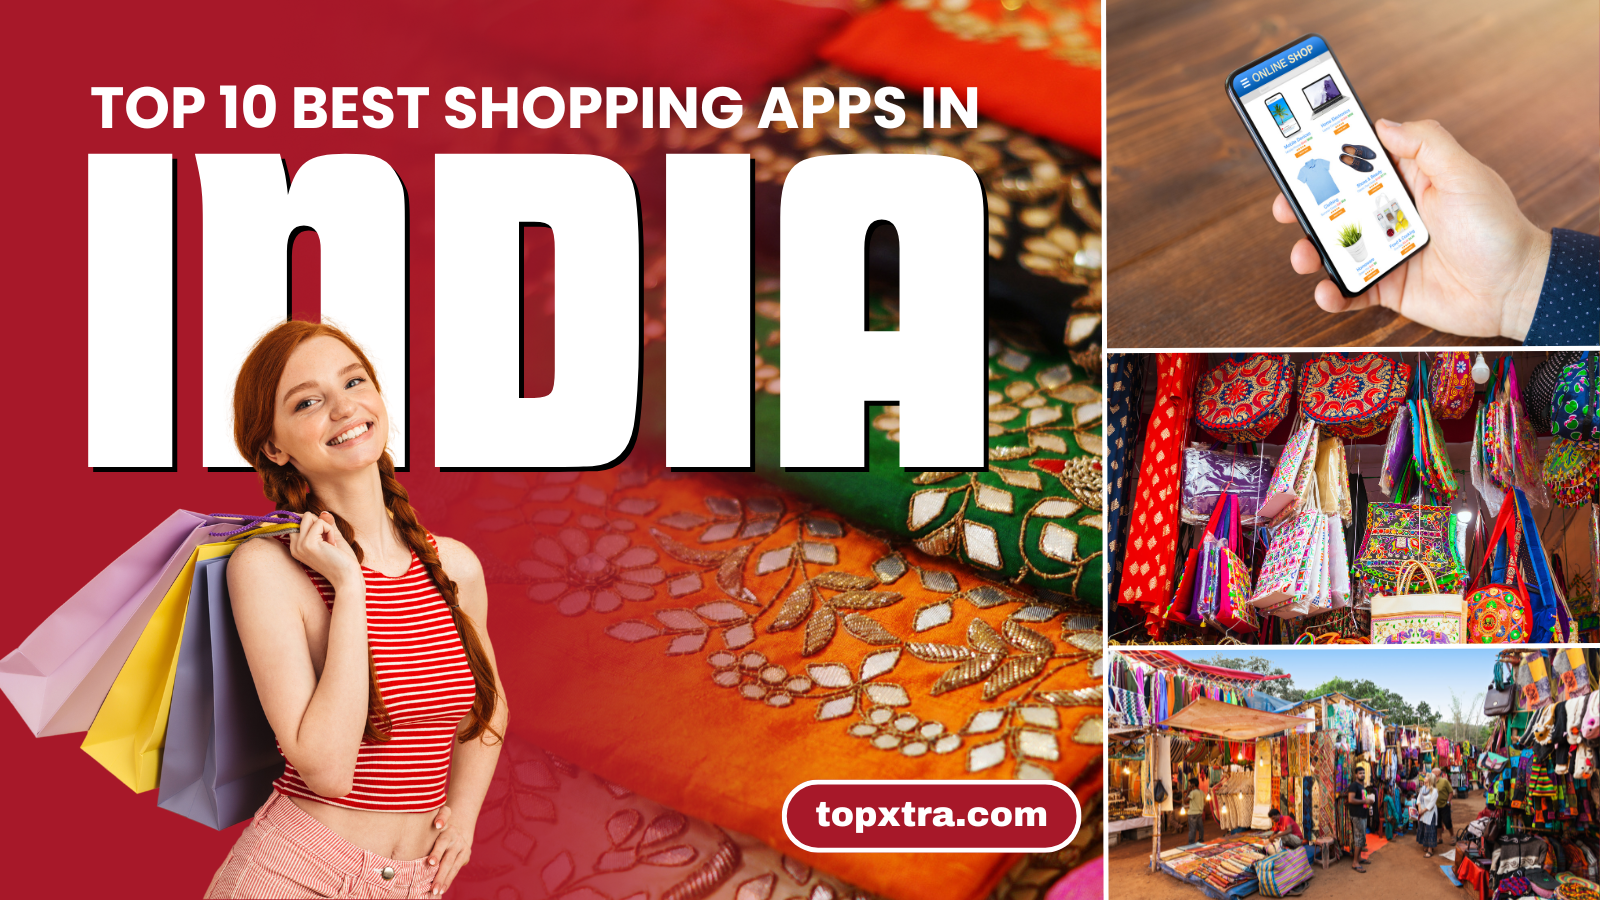 Top 10 Shopping Apps in India | Best Shopping Apps